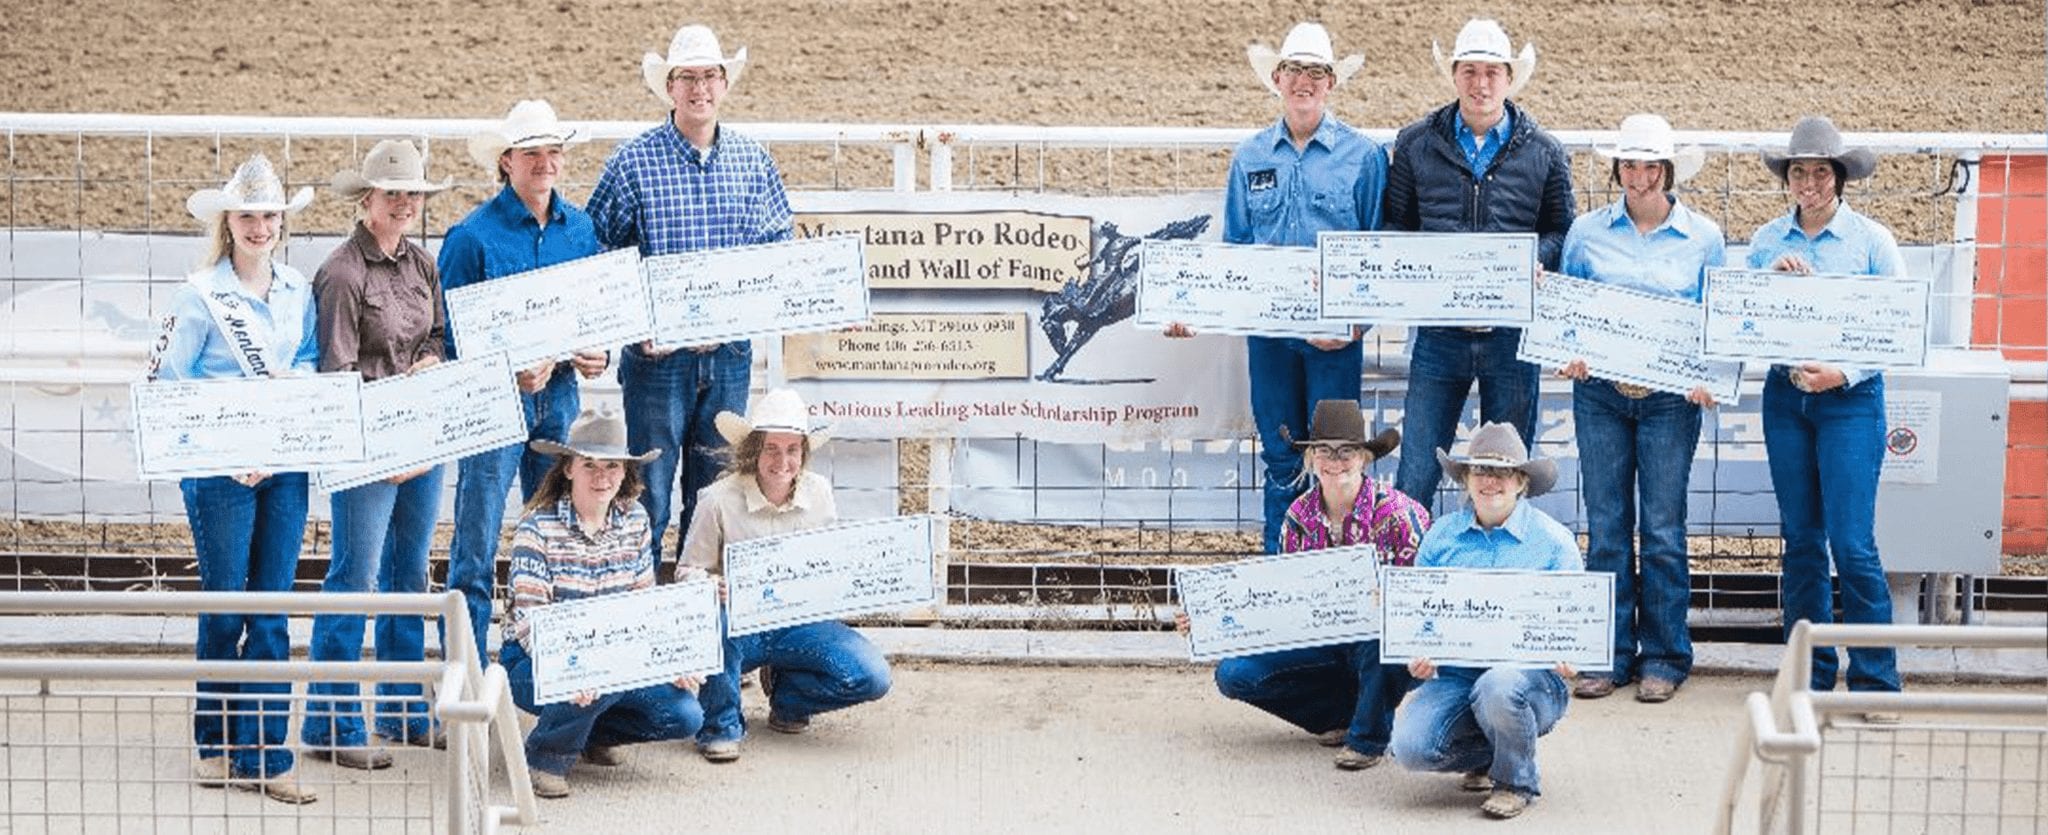 Scholarship Program Montana Pro Rodeo Hall and Wall of Fame